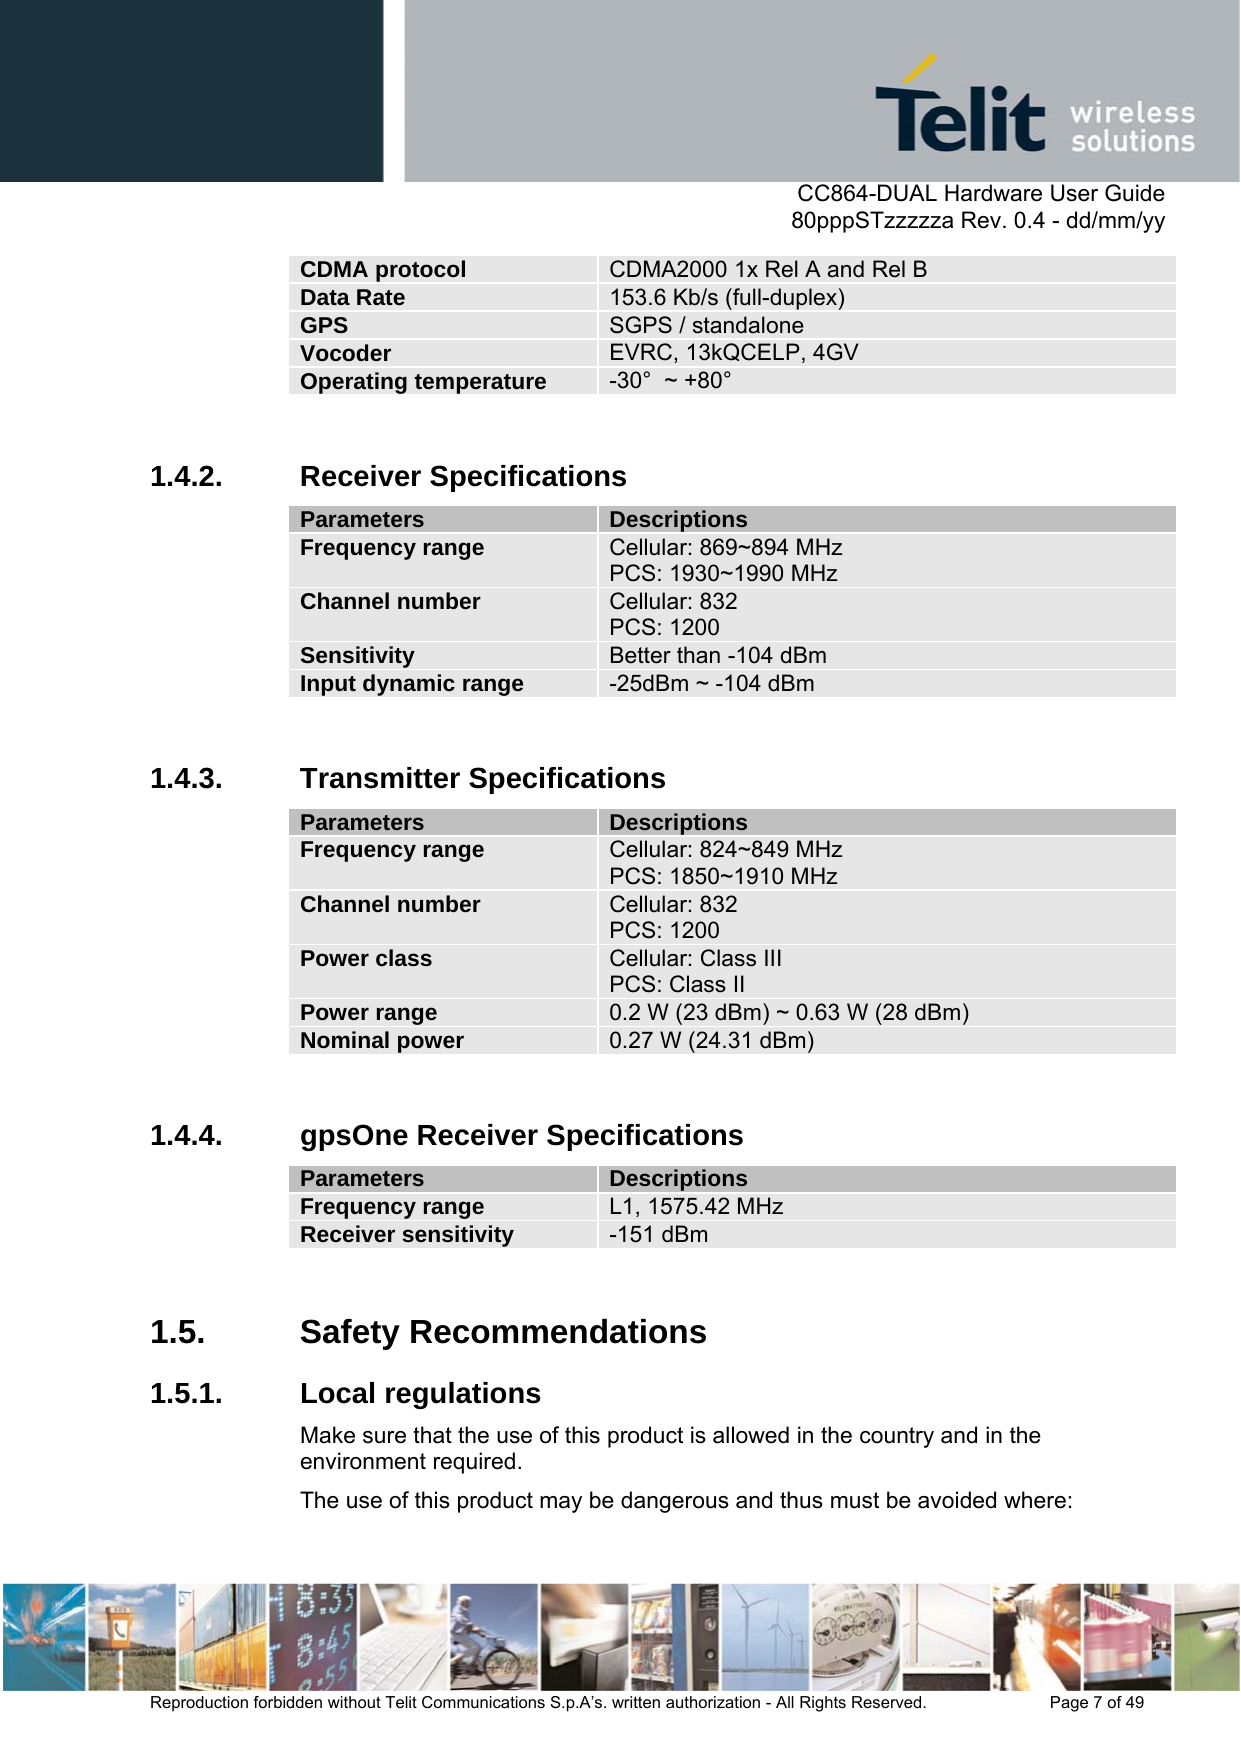      CC864-DUAL Hardware User Guide   80pppSTzzzzza Rev. 0.4 - dd/mm/yy   Reproduction forbidden without Telit Communications S.p.A’s. written authorization - All Rights Reserved.    Page 7 of 49  CDMA protocol  CDMA2000 1x Rel A and Rel B Data Rate  153.6 Kb/s (full-duplex) GPS  SGPS / standalone Vocoder  EVRC, 13kQCELP, 4GV Operating temperature  -30°  ~ +80°  1.4.2. Receiver Specifications Parameters  Descriptions Frequency range  Cellular: 869~894 MHz PCS: 1930~1990 MHz  Channel number  Cellular: 832 PCS: 1200 Sensitivity  Better than -104 dBm Input dynamic range  -25dBm ~ -104 dBm  1.4.3. Transmitter Specifications Parameters  Descriptions Frequency range  Cellular: 824~849 MHz PCS: 1850~1910 MHz Channel number  Cellular: 832  PCS: 1200 Power class  Cellular: Class III   PCS: Class II Power range  0.2 W (23 dBm) ~ 0.63 W (28 dBm) Nominal power   0.27 W (24.31 dBm)  1.4.4.  gpsOne Receiver Specifications Parameters  Descriptions Frequency range  L1, 1575.42 MHz Receiver sensitivity  -151 dBm  1.5. Safety Recommendations 1.5.1. Local regulations Make sure that the use of this product is allowed in the country and in the environment required.  The use of this product may be dangerous and thus must be avoided where: 